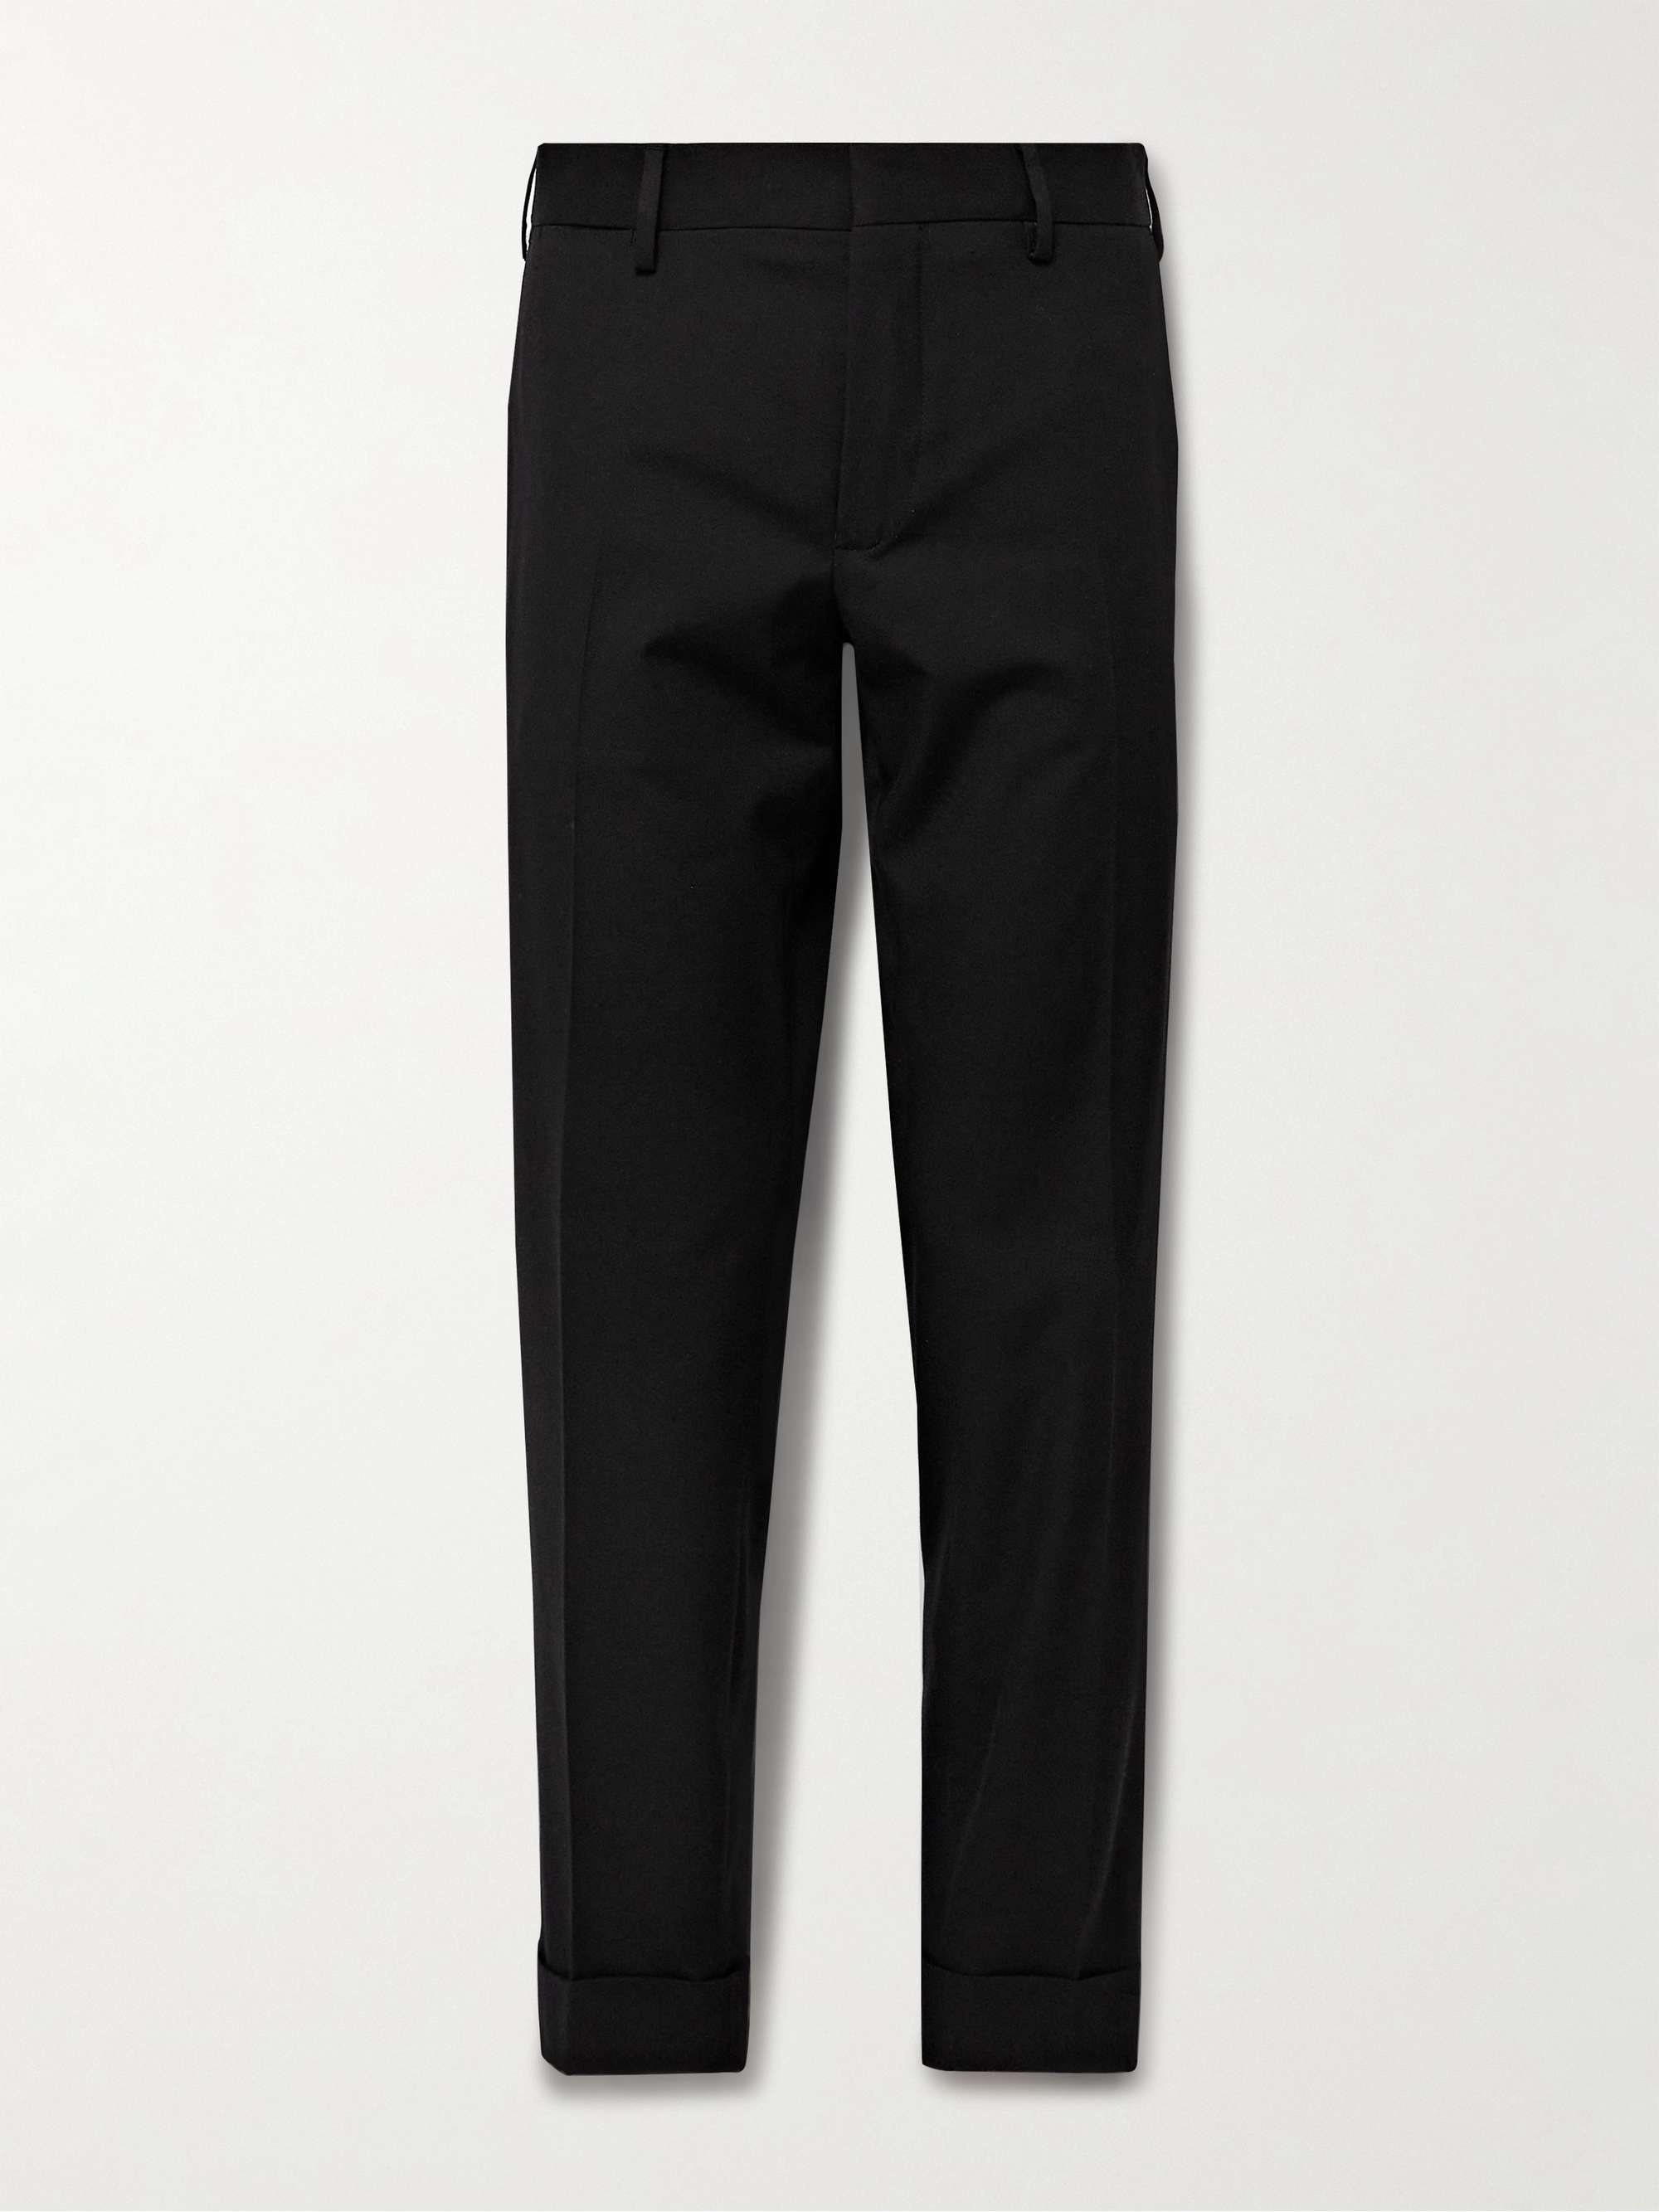 DRIES VAN NOTEN Philip Slim-Fit Cropped Cotton and Wool-Blend